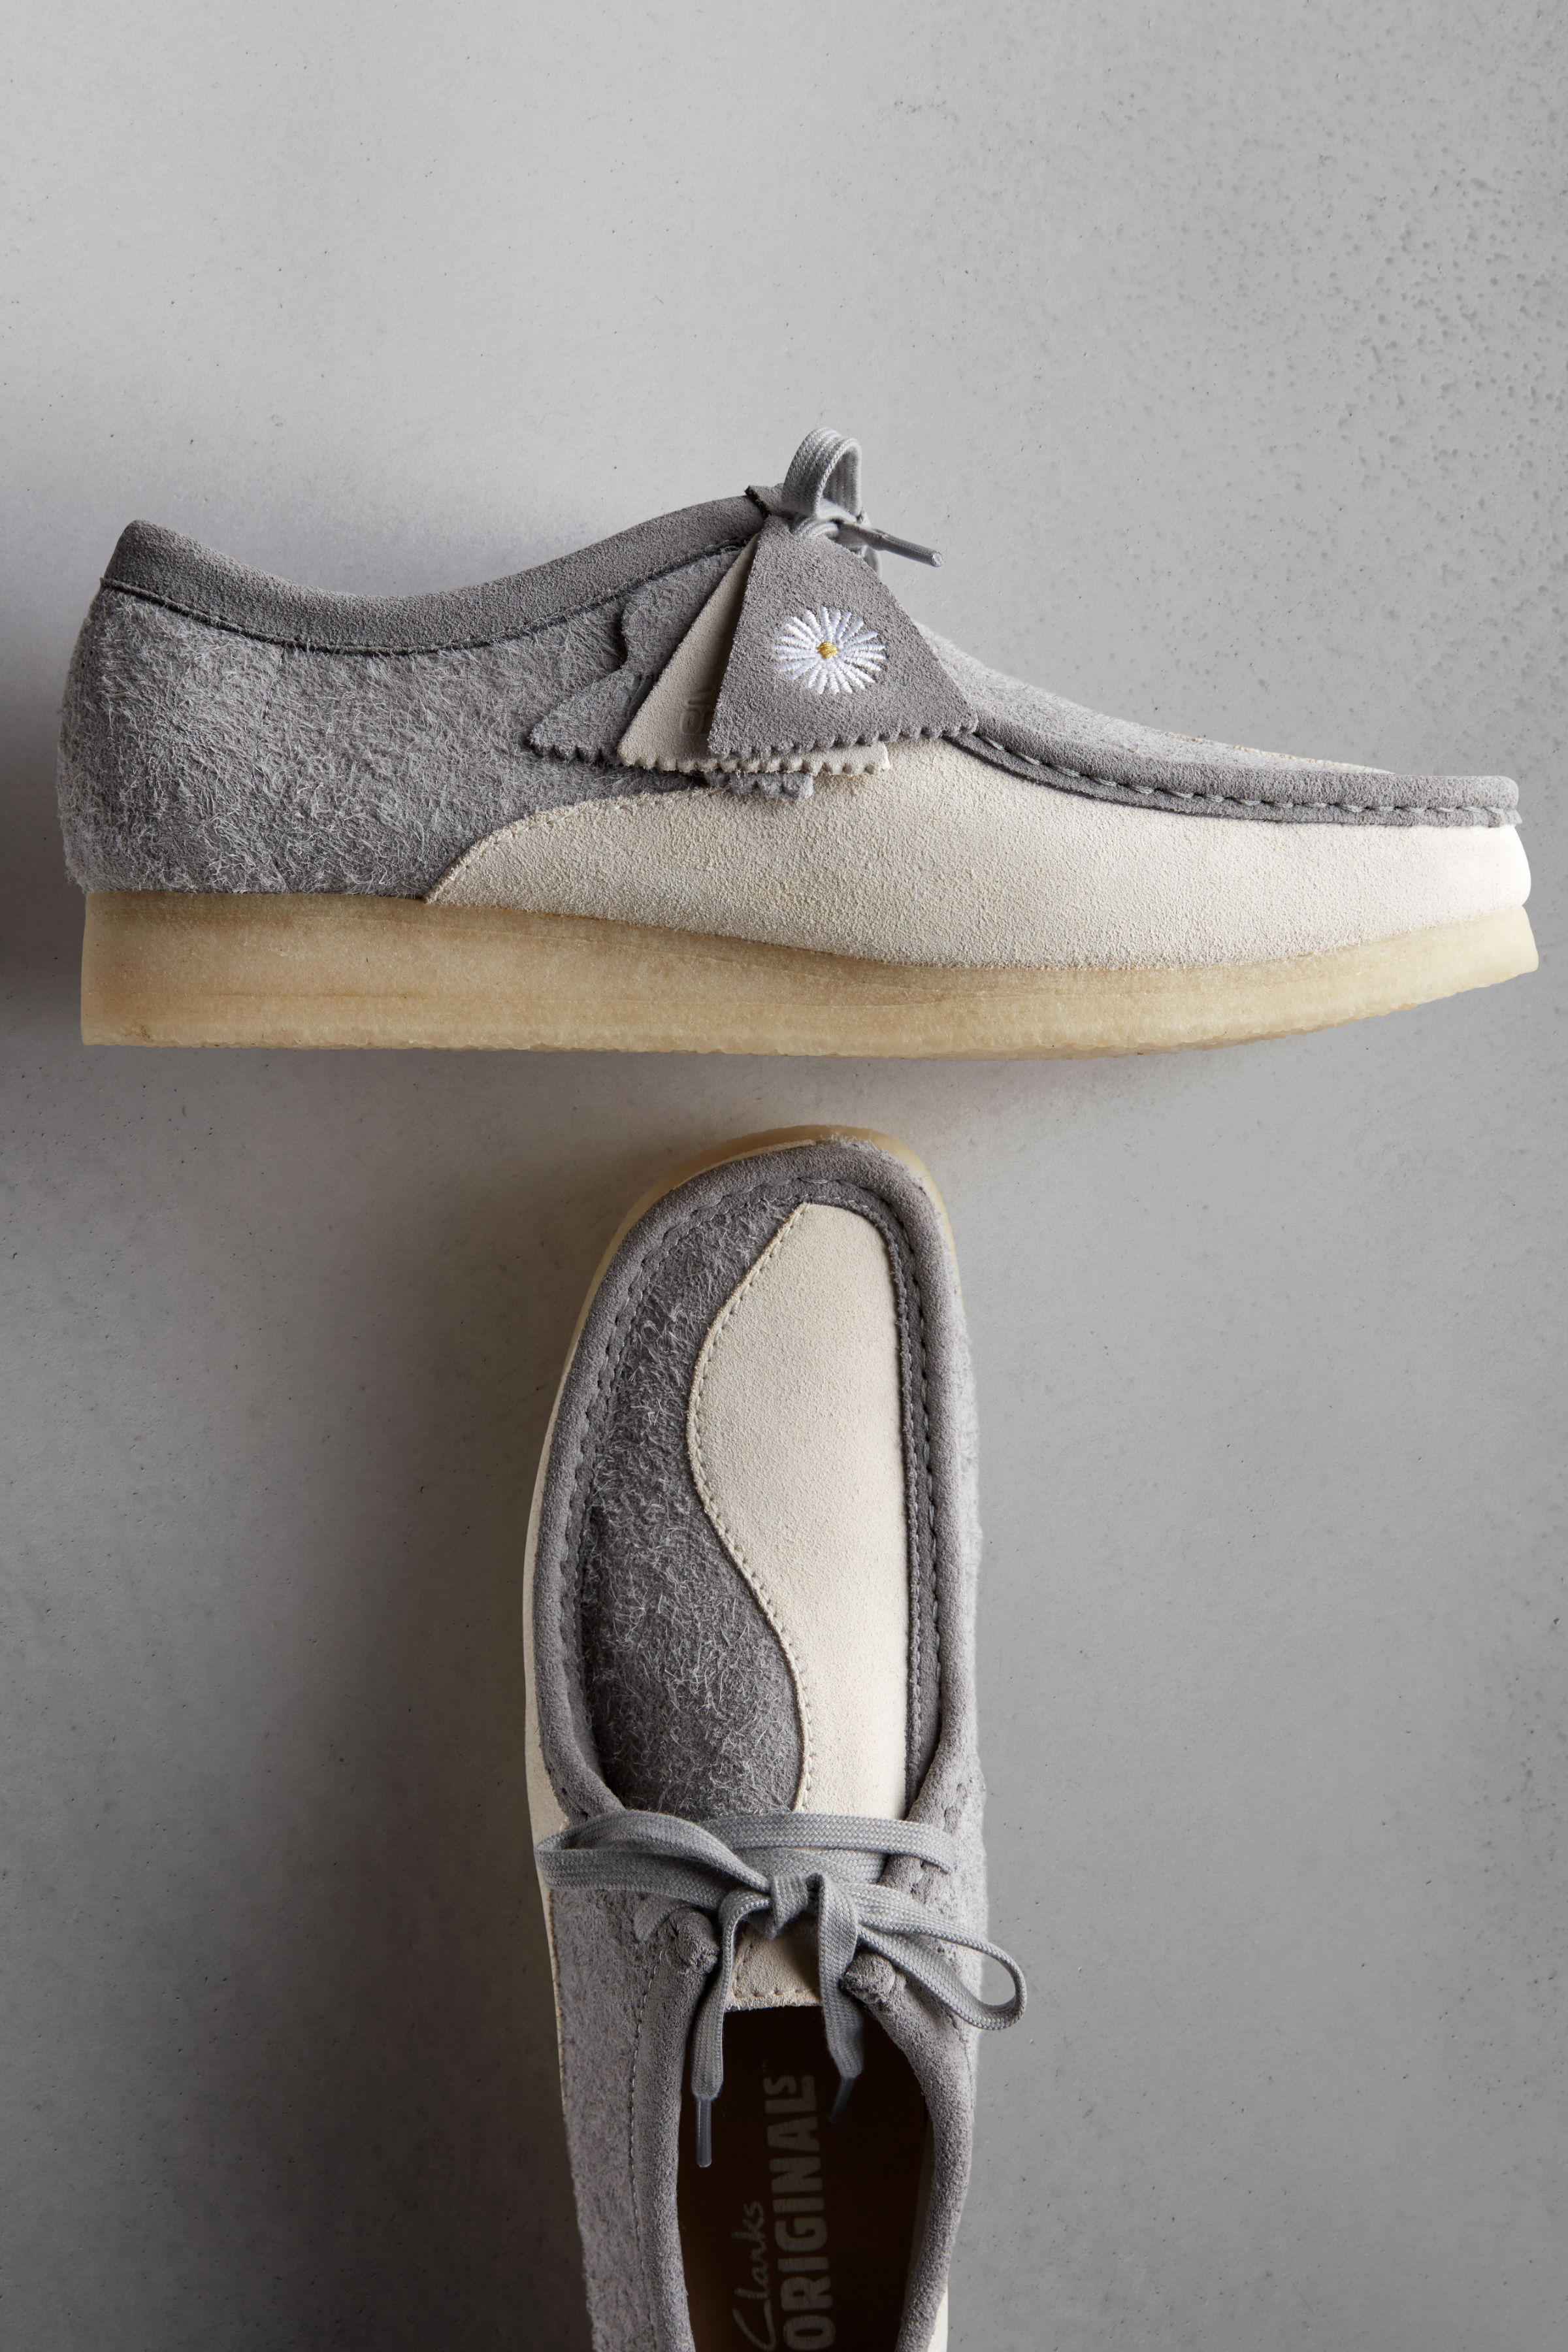 One suede moccasin shoe sits on top of the other